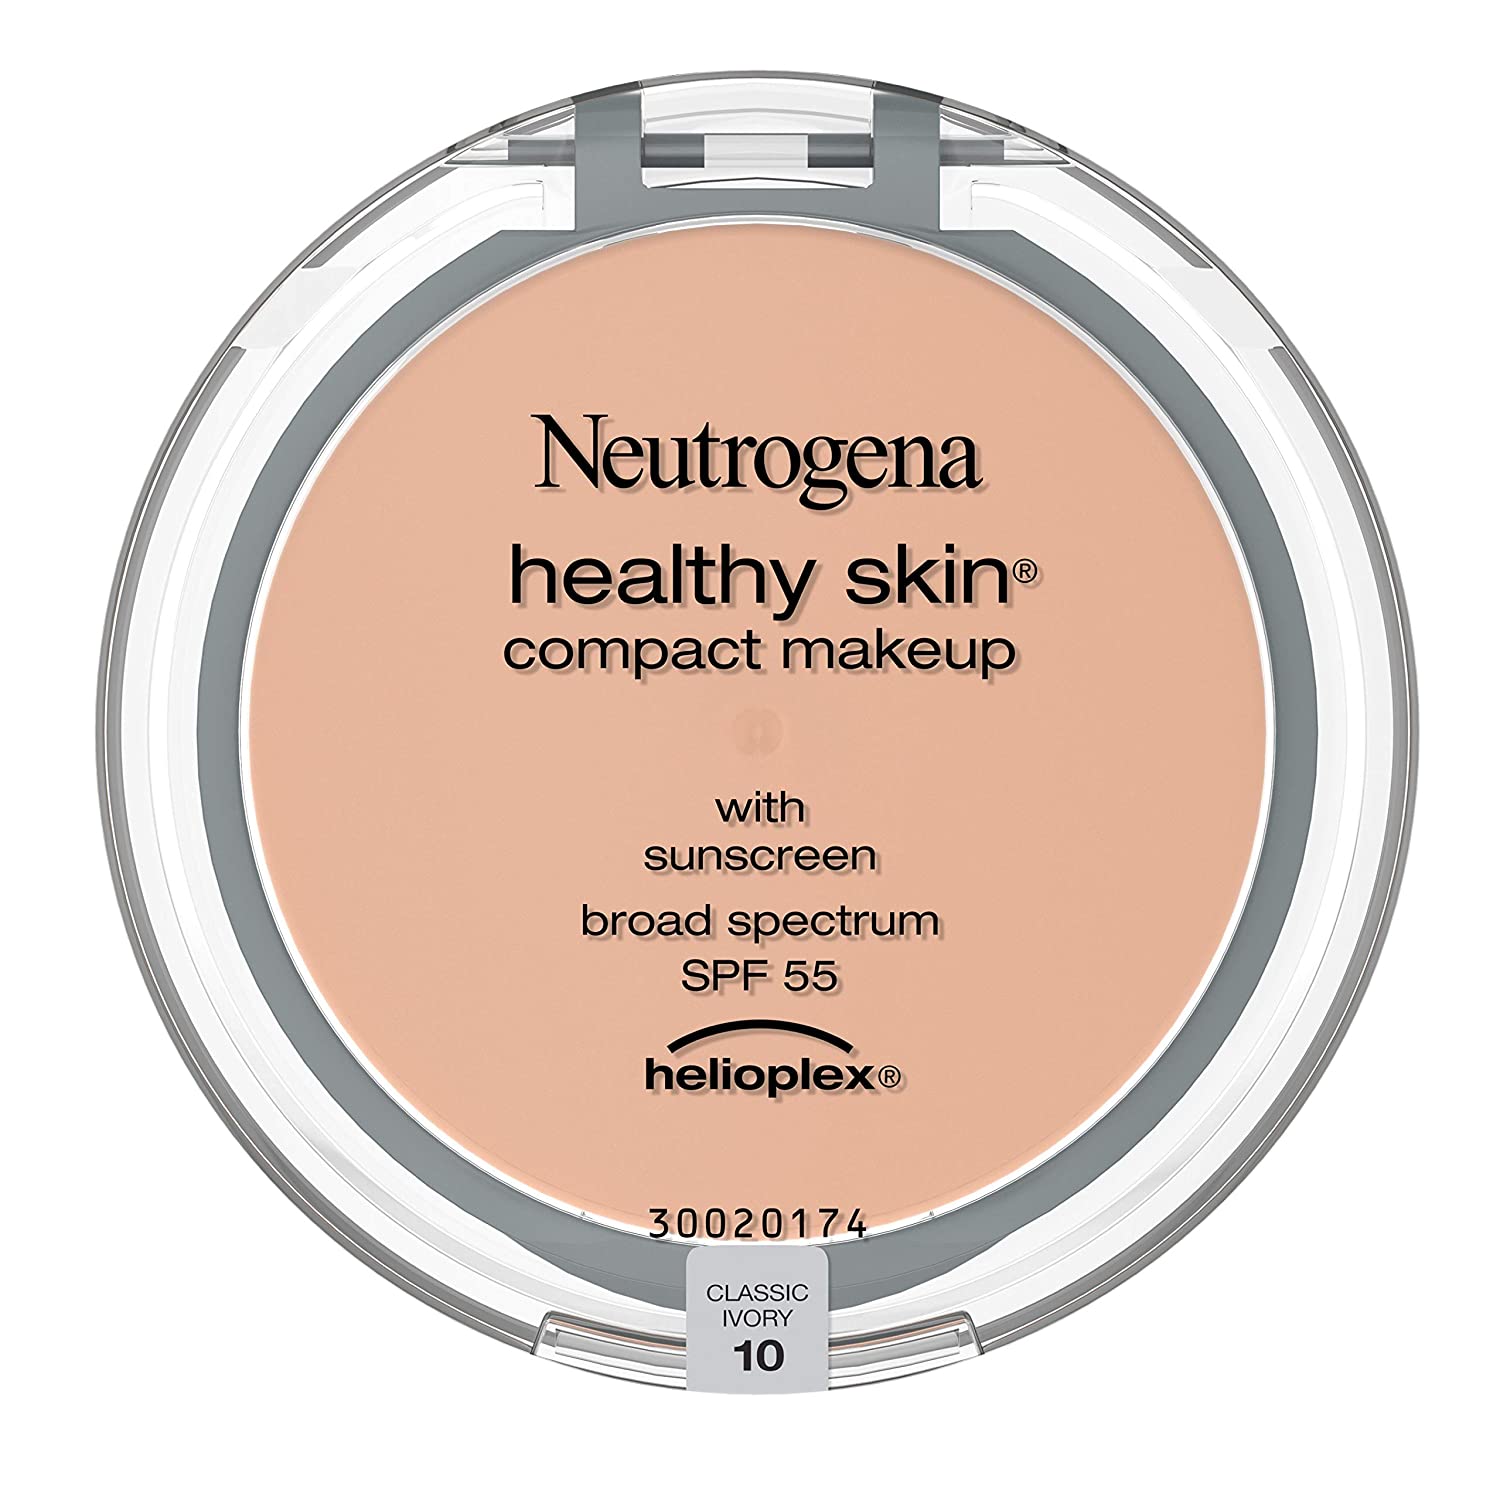 Neutrogena Healthy Skin Compact Lightweight Cream Foundation Makeup with Vitamin E Antioxidants, Non-Greasy Foundation with Broad Spectrum SPF 55